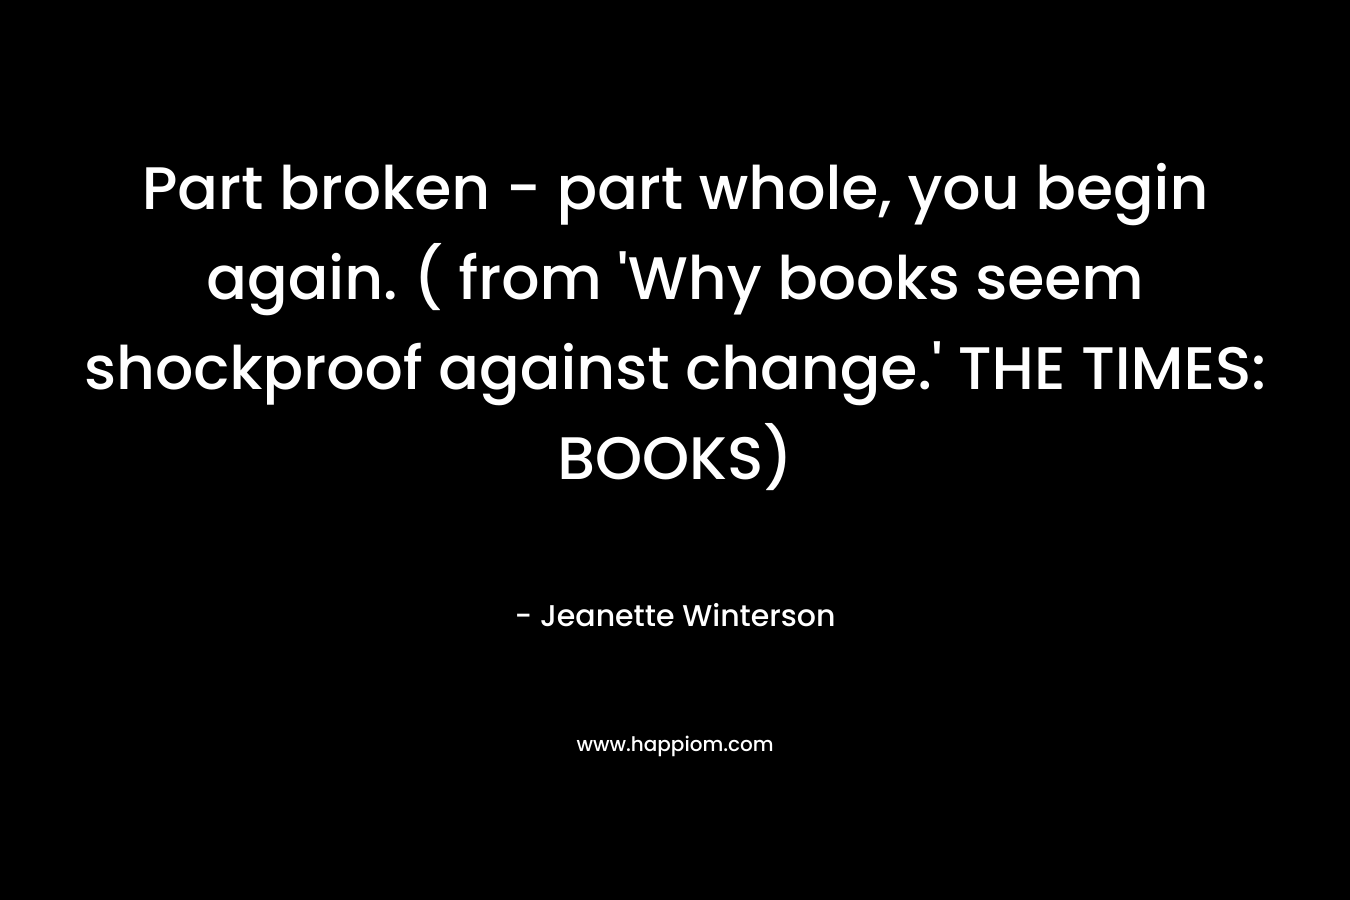 Part broken - part whole, you begin again. ( from 'Why books seem shockproof against change.' THE TIMES: BOOKS)